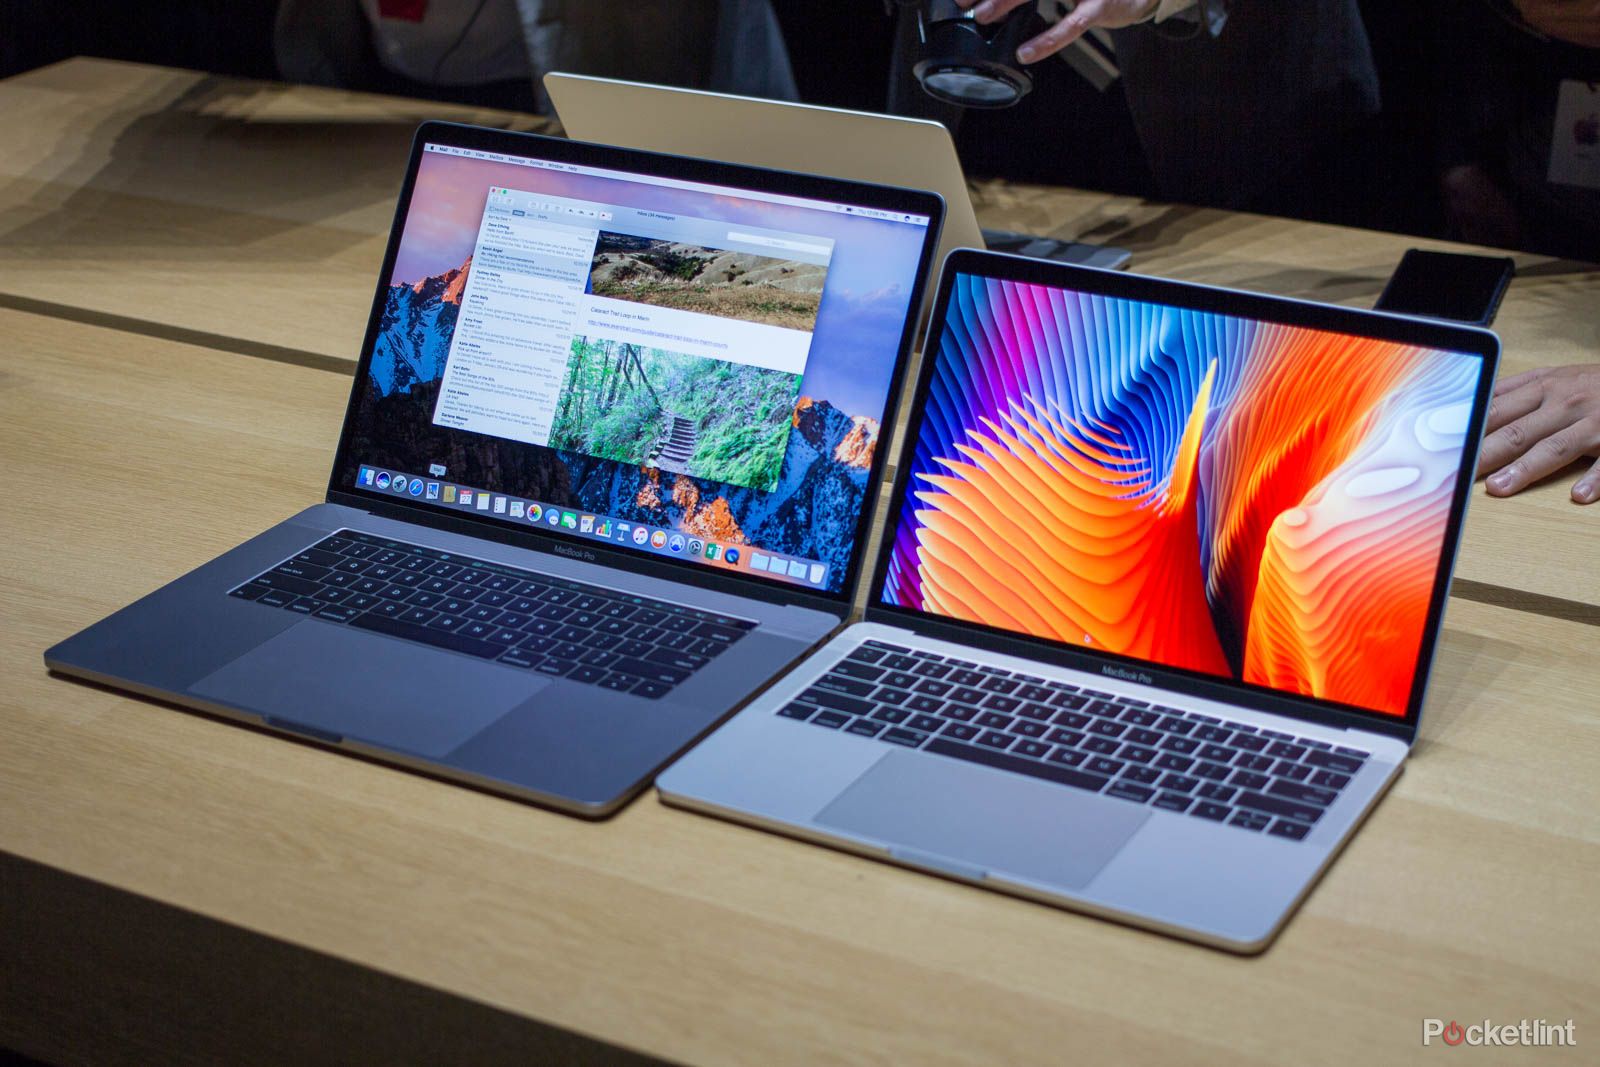 Some 15-inch MacBook Pro batteries being recalled due to overheating heres how to check if yours is one image 1